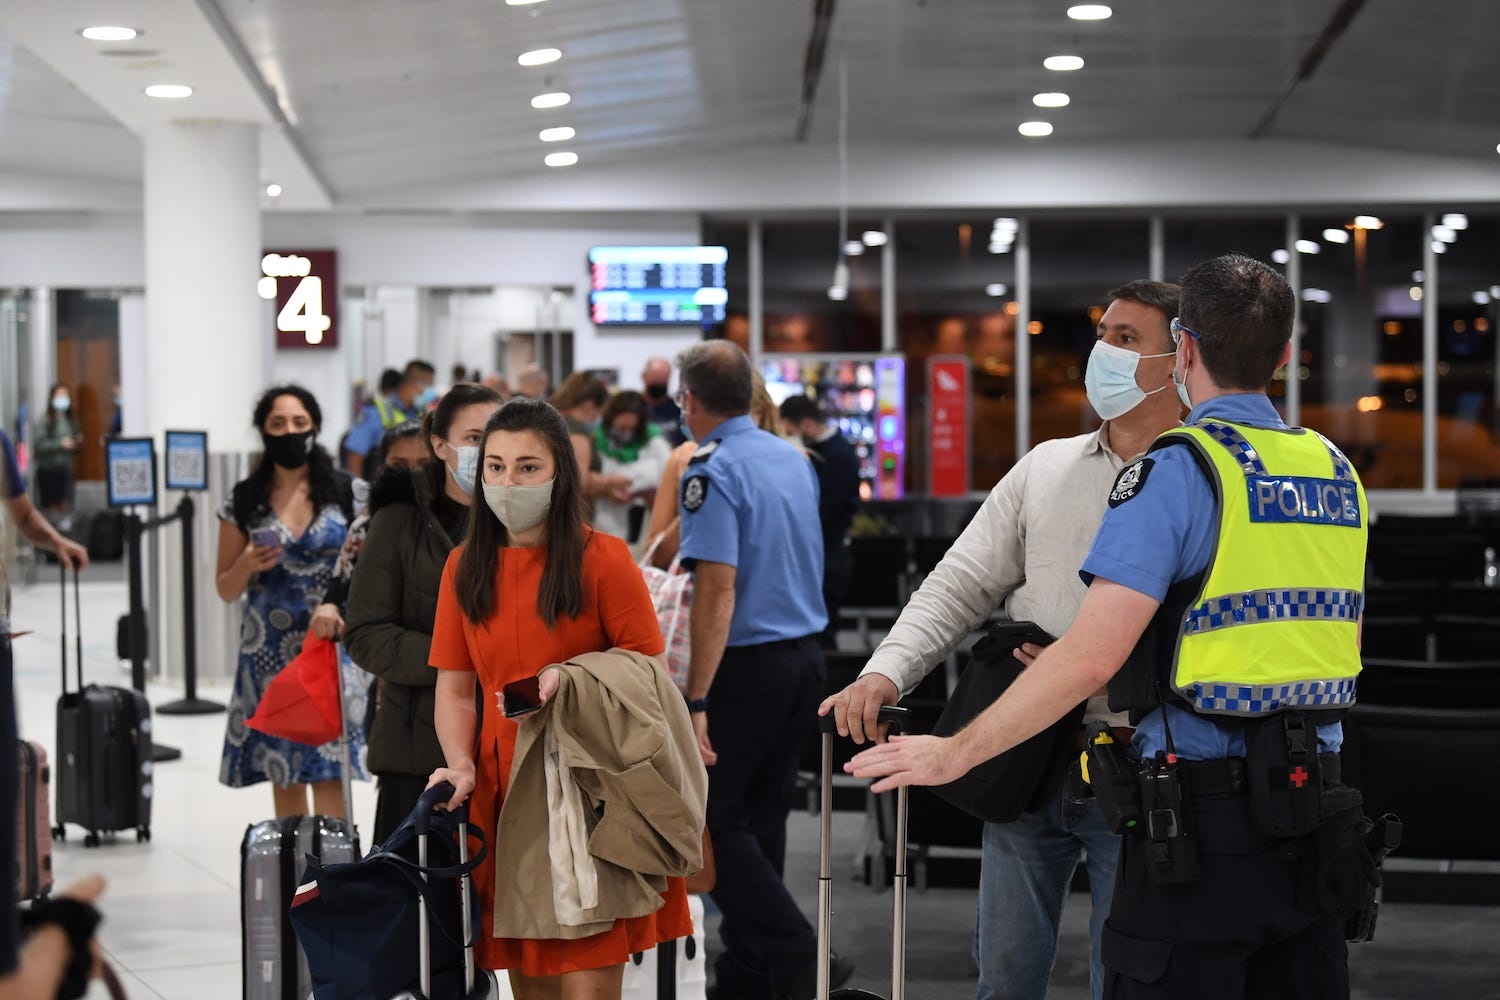 Volunteers may be asked to assist passengers with lost baggage and ferry people through security. James D. Morgan / Contributor/ Getty Images